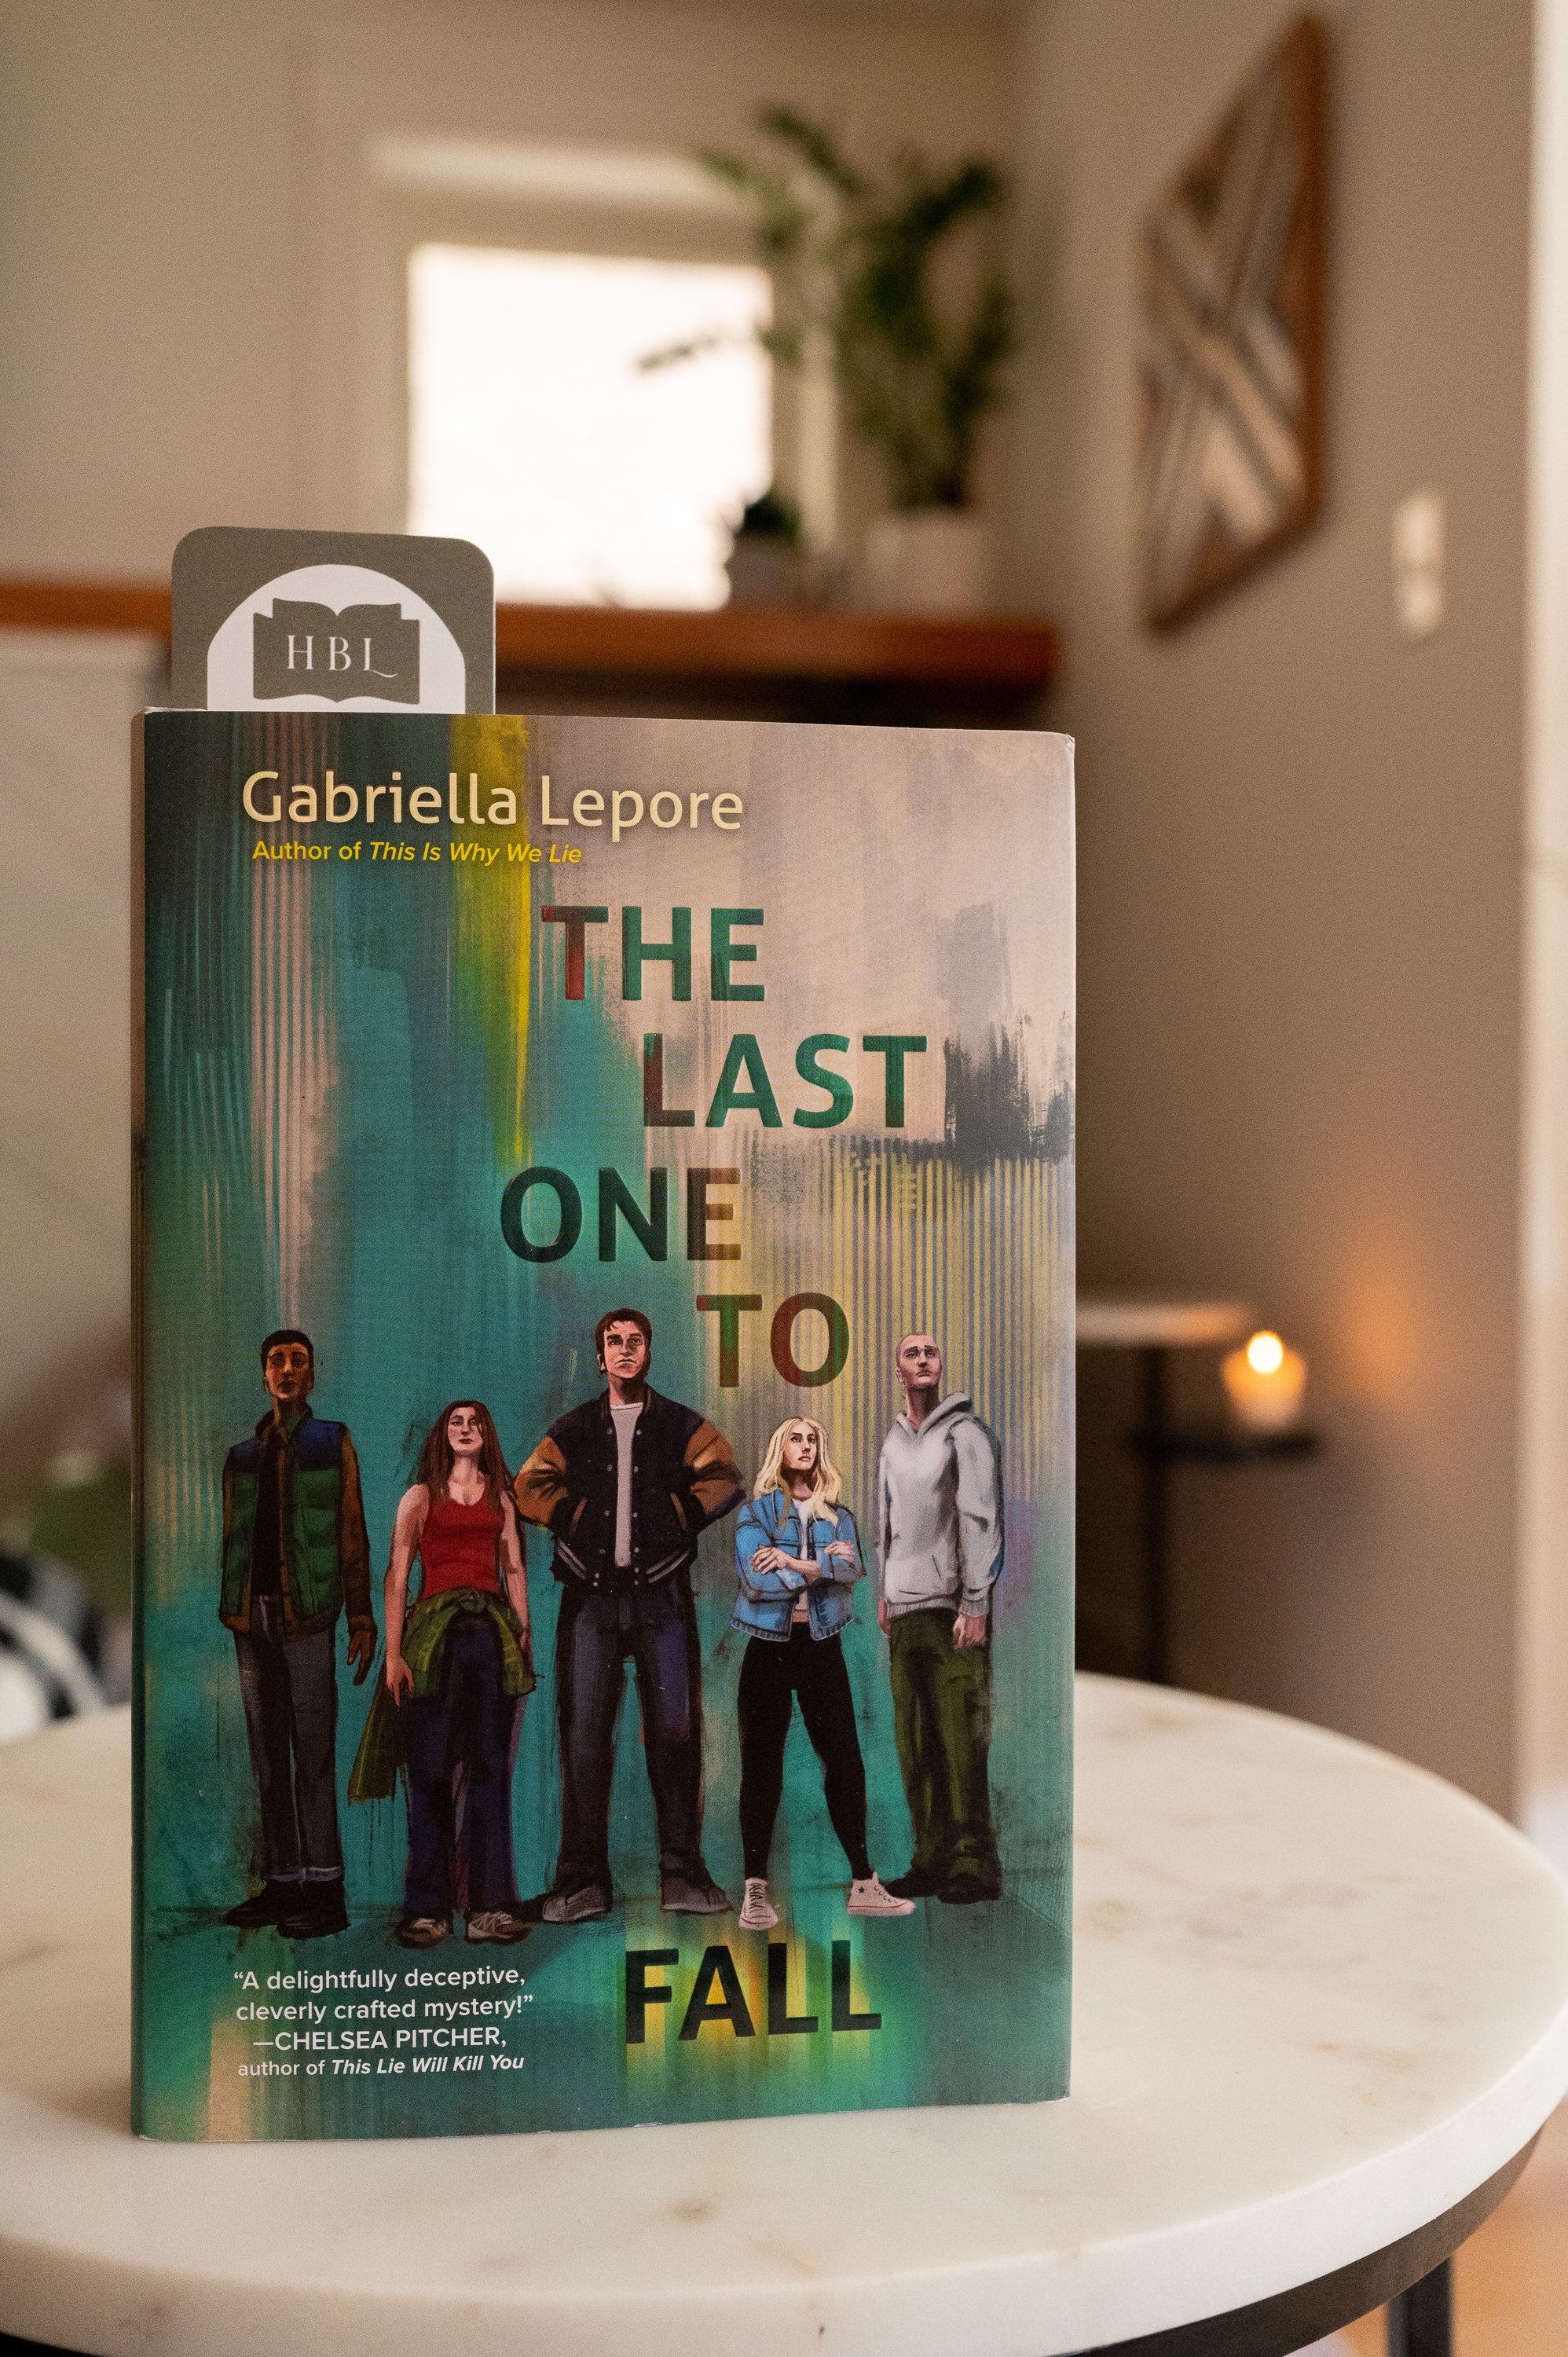 The Last One to Fall by Gabriella Lepore.jpg